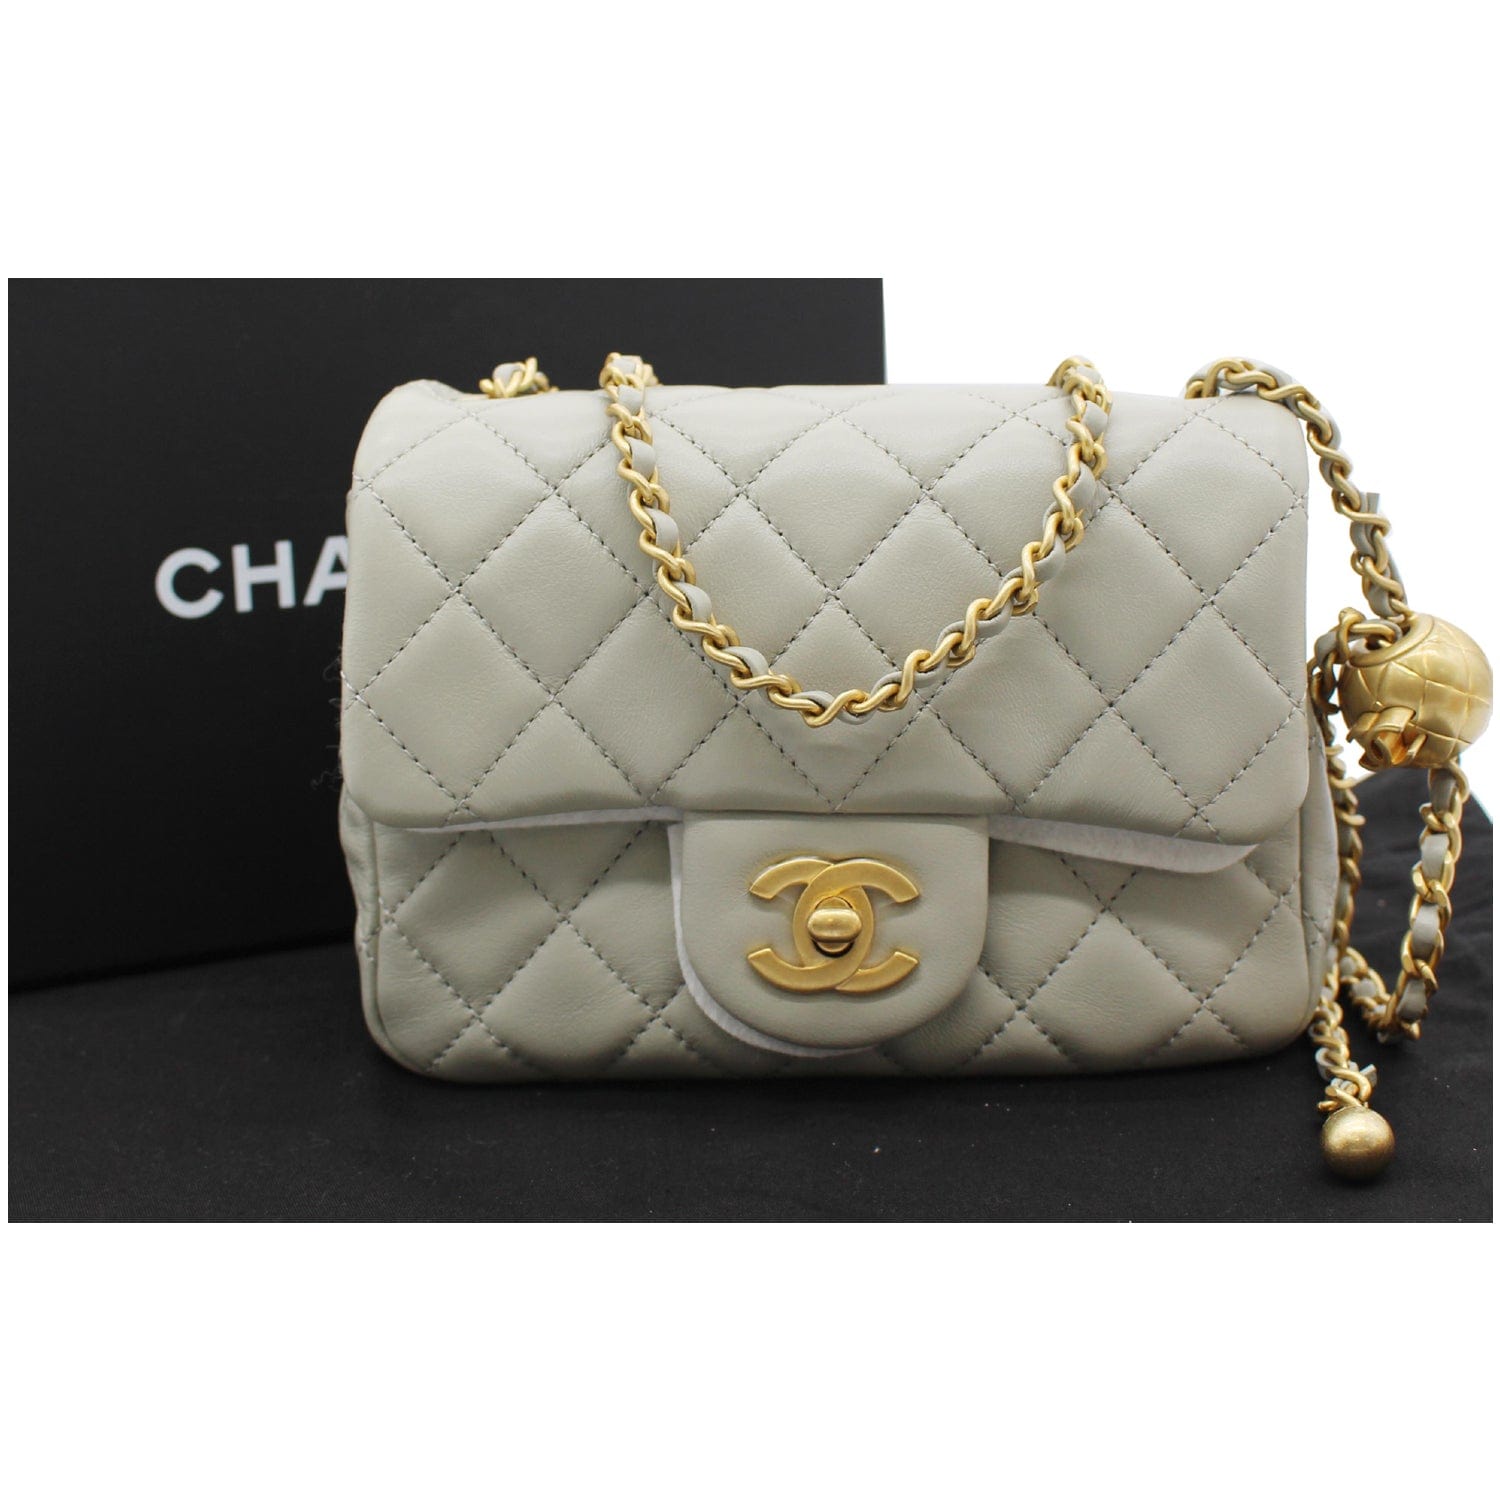 Buy Givenchy Bags & Handbags online - Women - 111 products